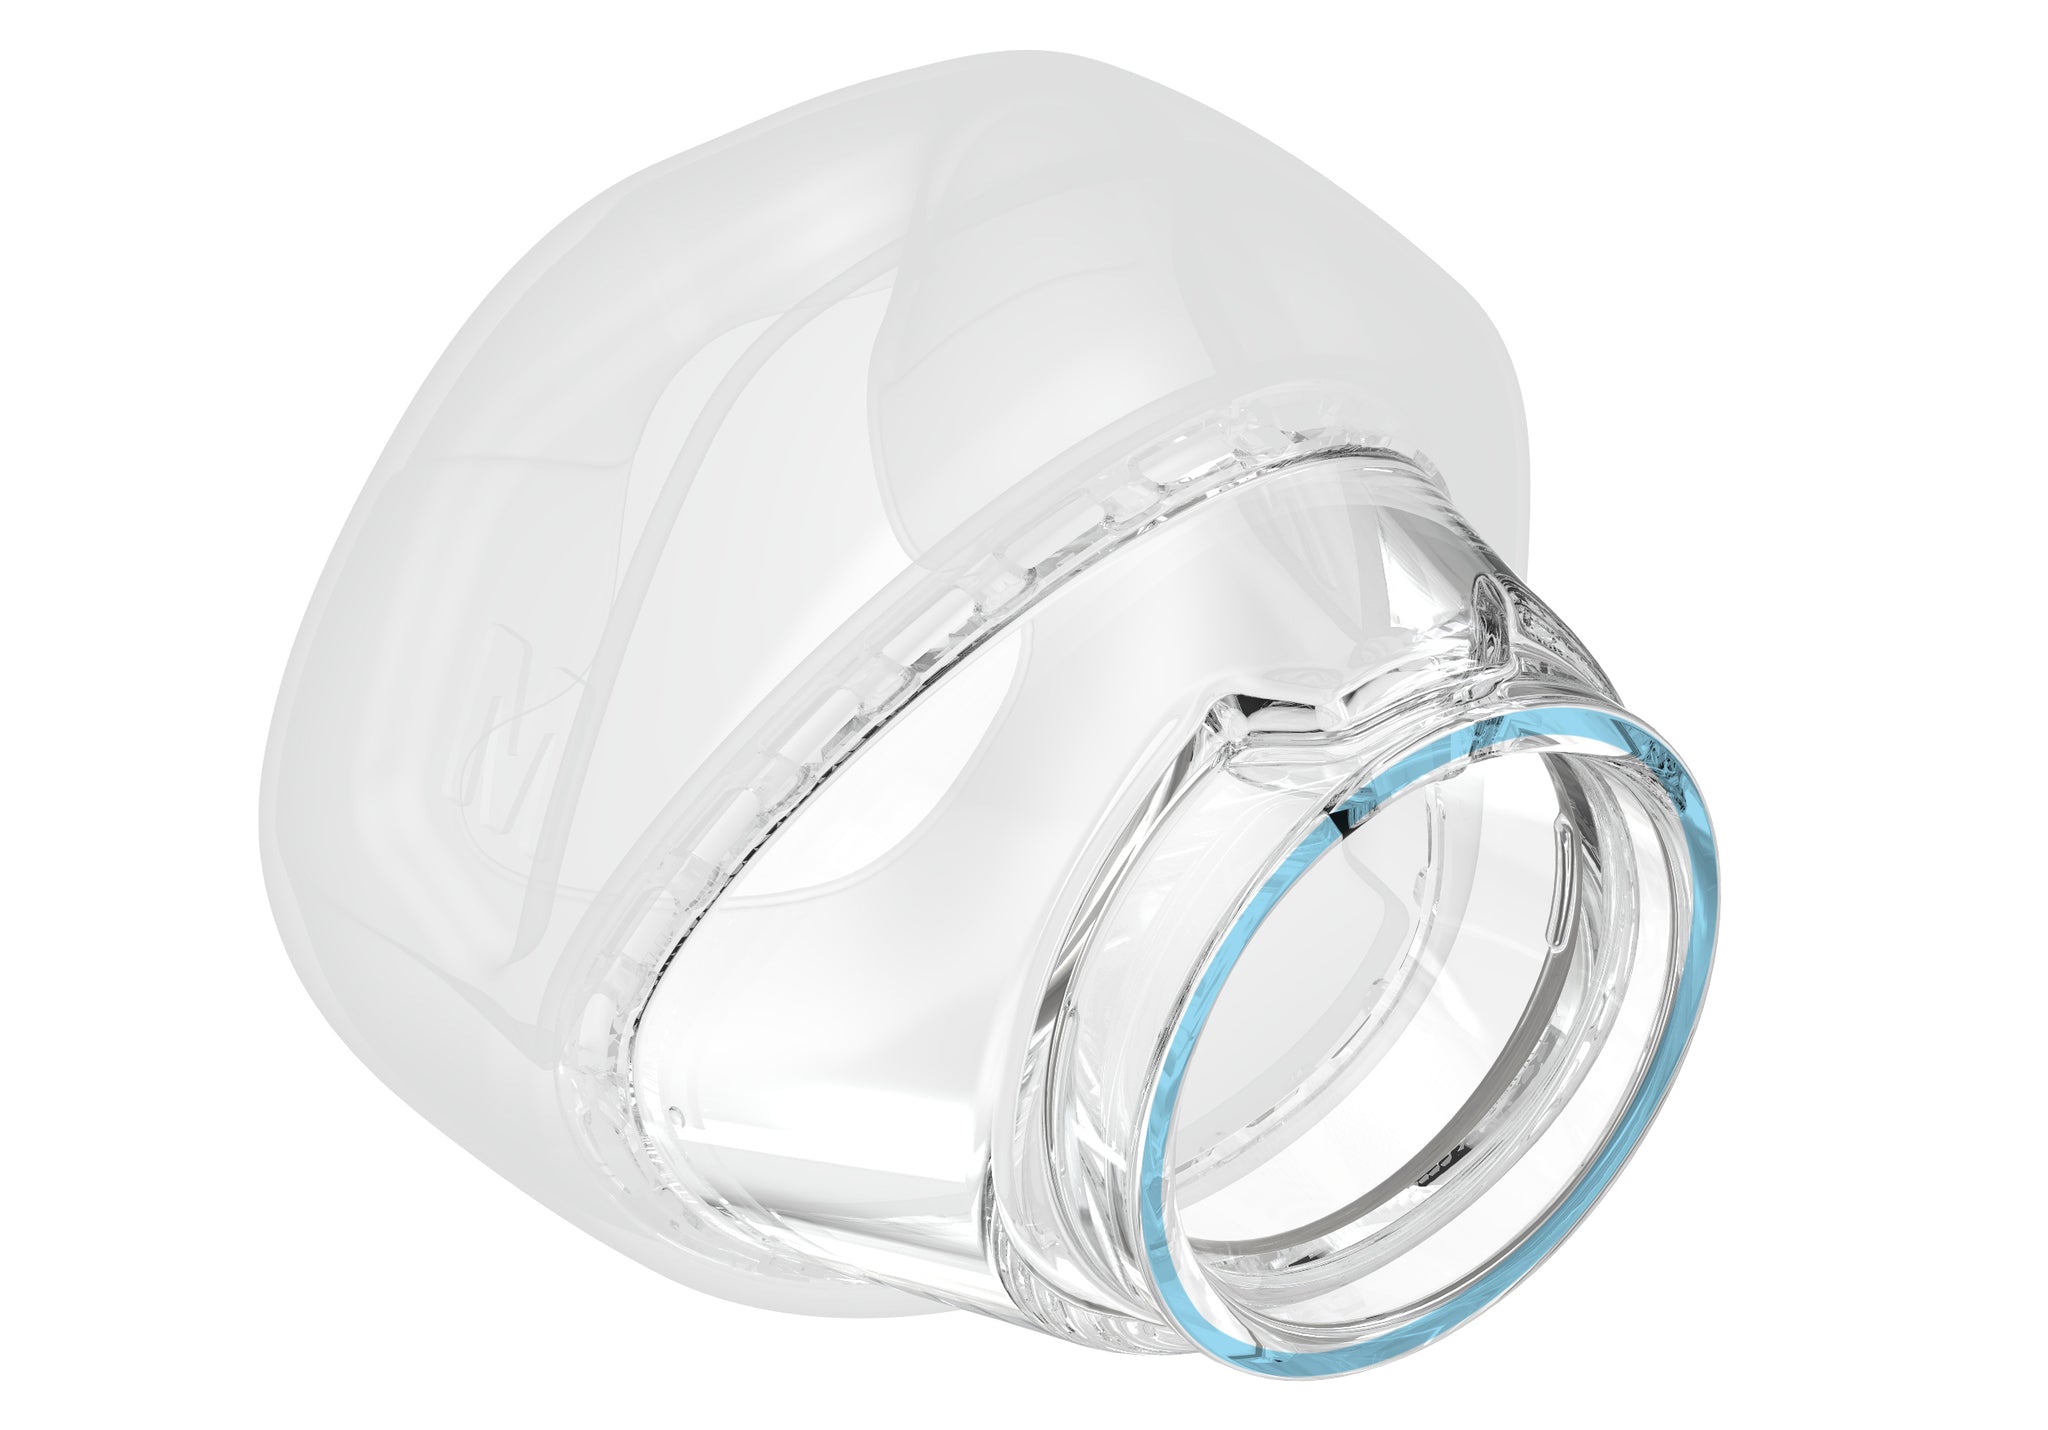 Fisher and Paykel Eson 2 nasal cushion